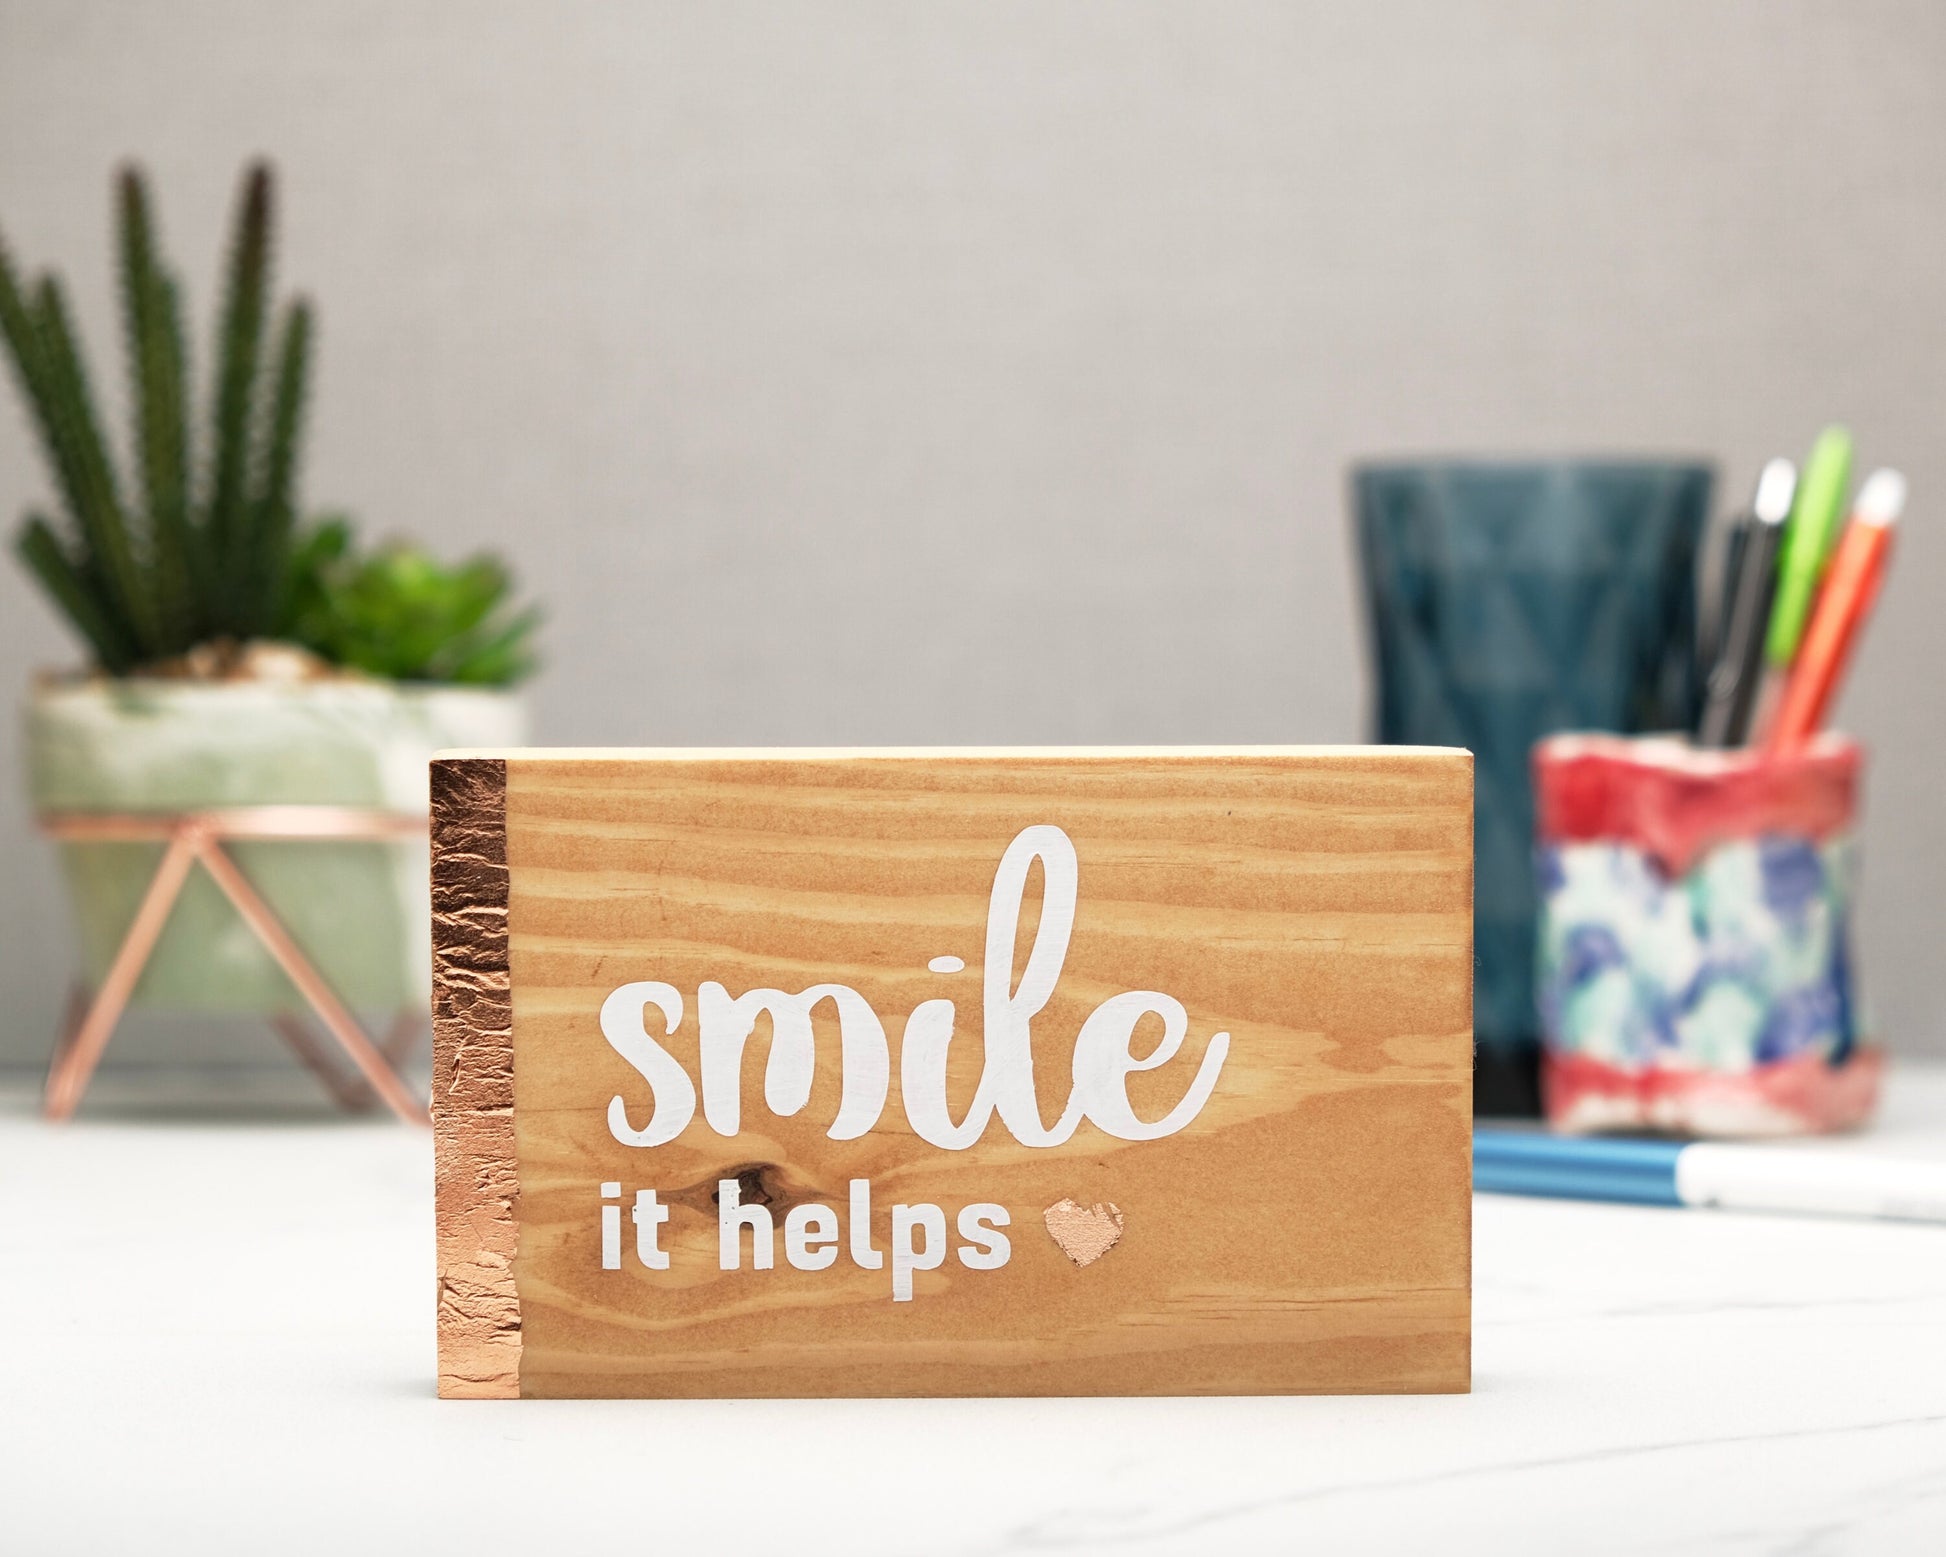 Small freestanding rectangular wooden sign facing straight on. Natural wood color, bronze rose gold vertical border on left side. White painted quote, Smile it helps. Small solid bronze rose gold heart. Plant and pen pot out of focus in background.